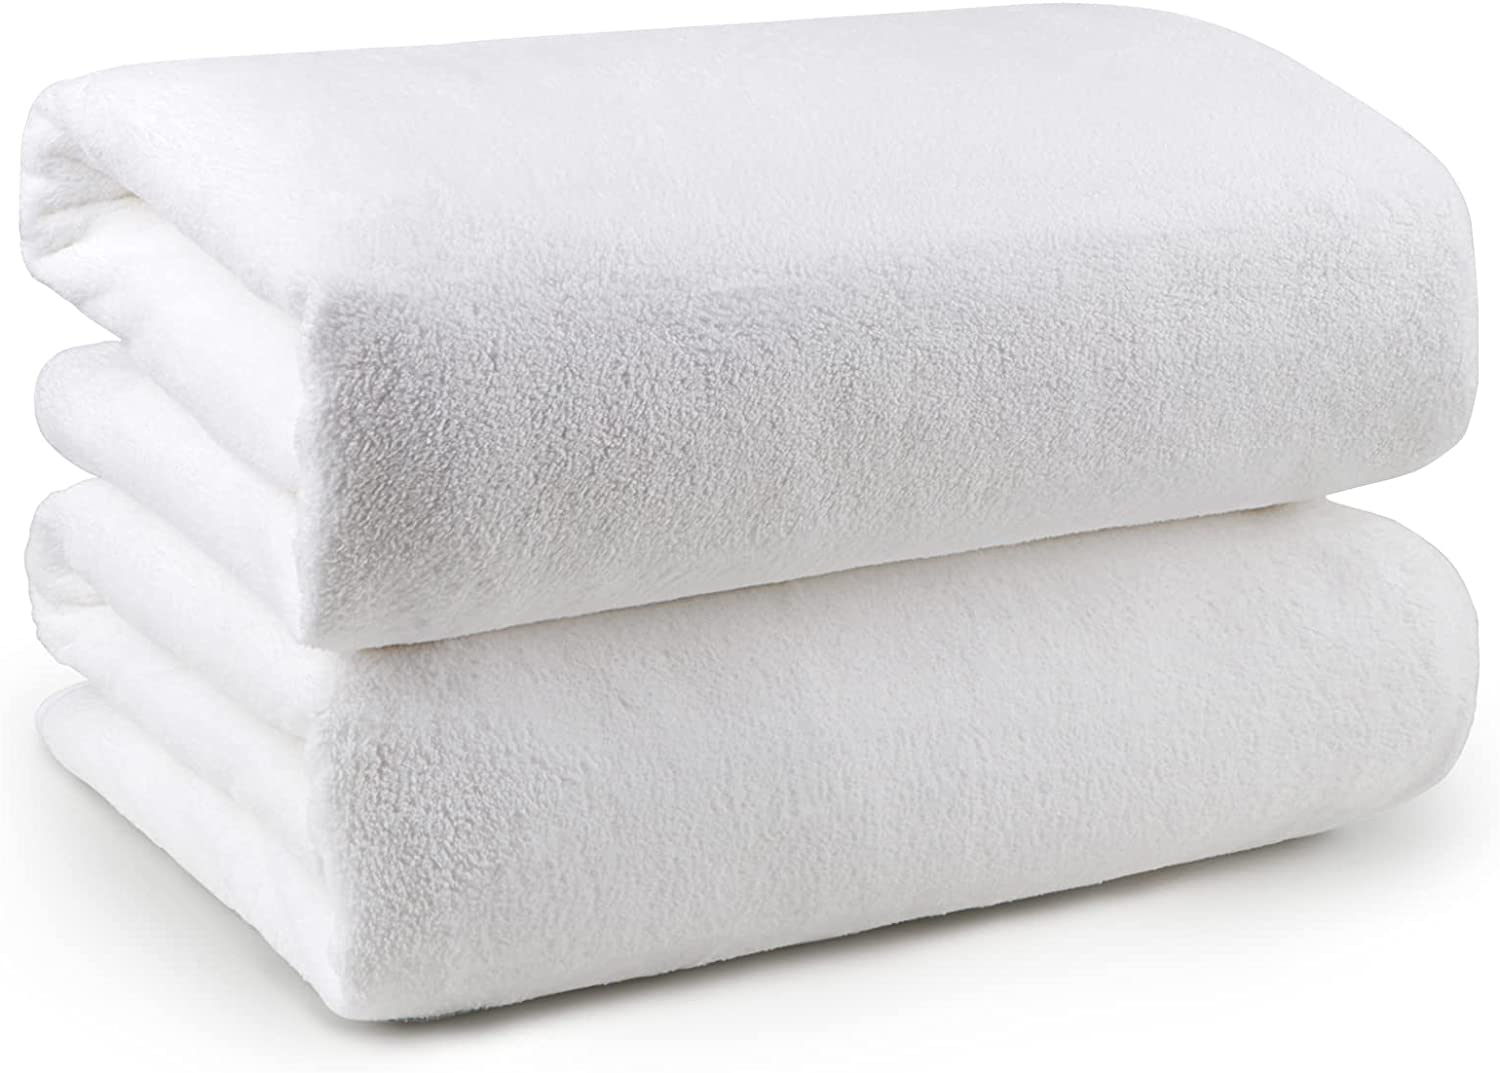 Orighty Bath Towels Pack of 2(27'' x 54'') - Soft Feel White Bath Towel,  Highly Absorbent Microfiber Towels for Body, Quick Drying, Microfiber Bath